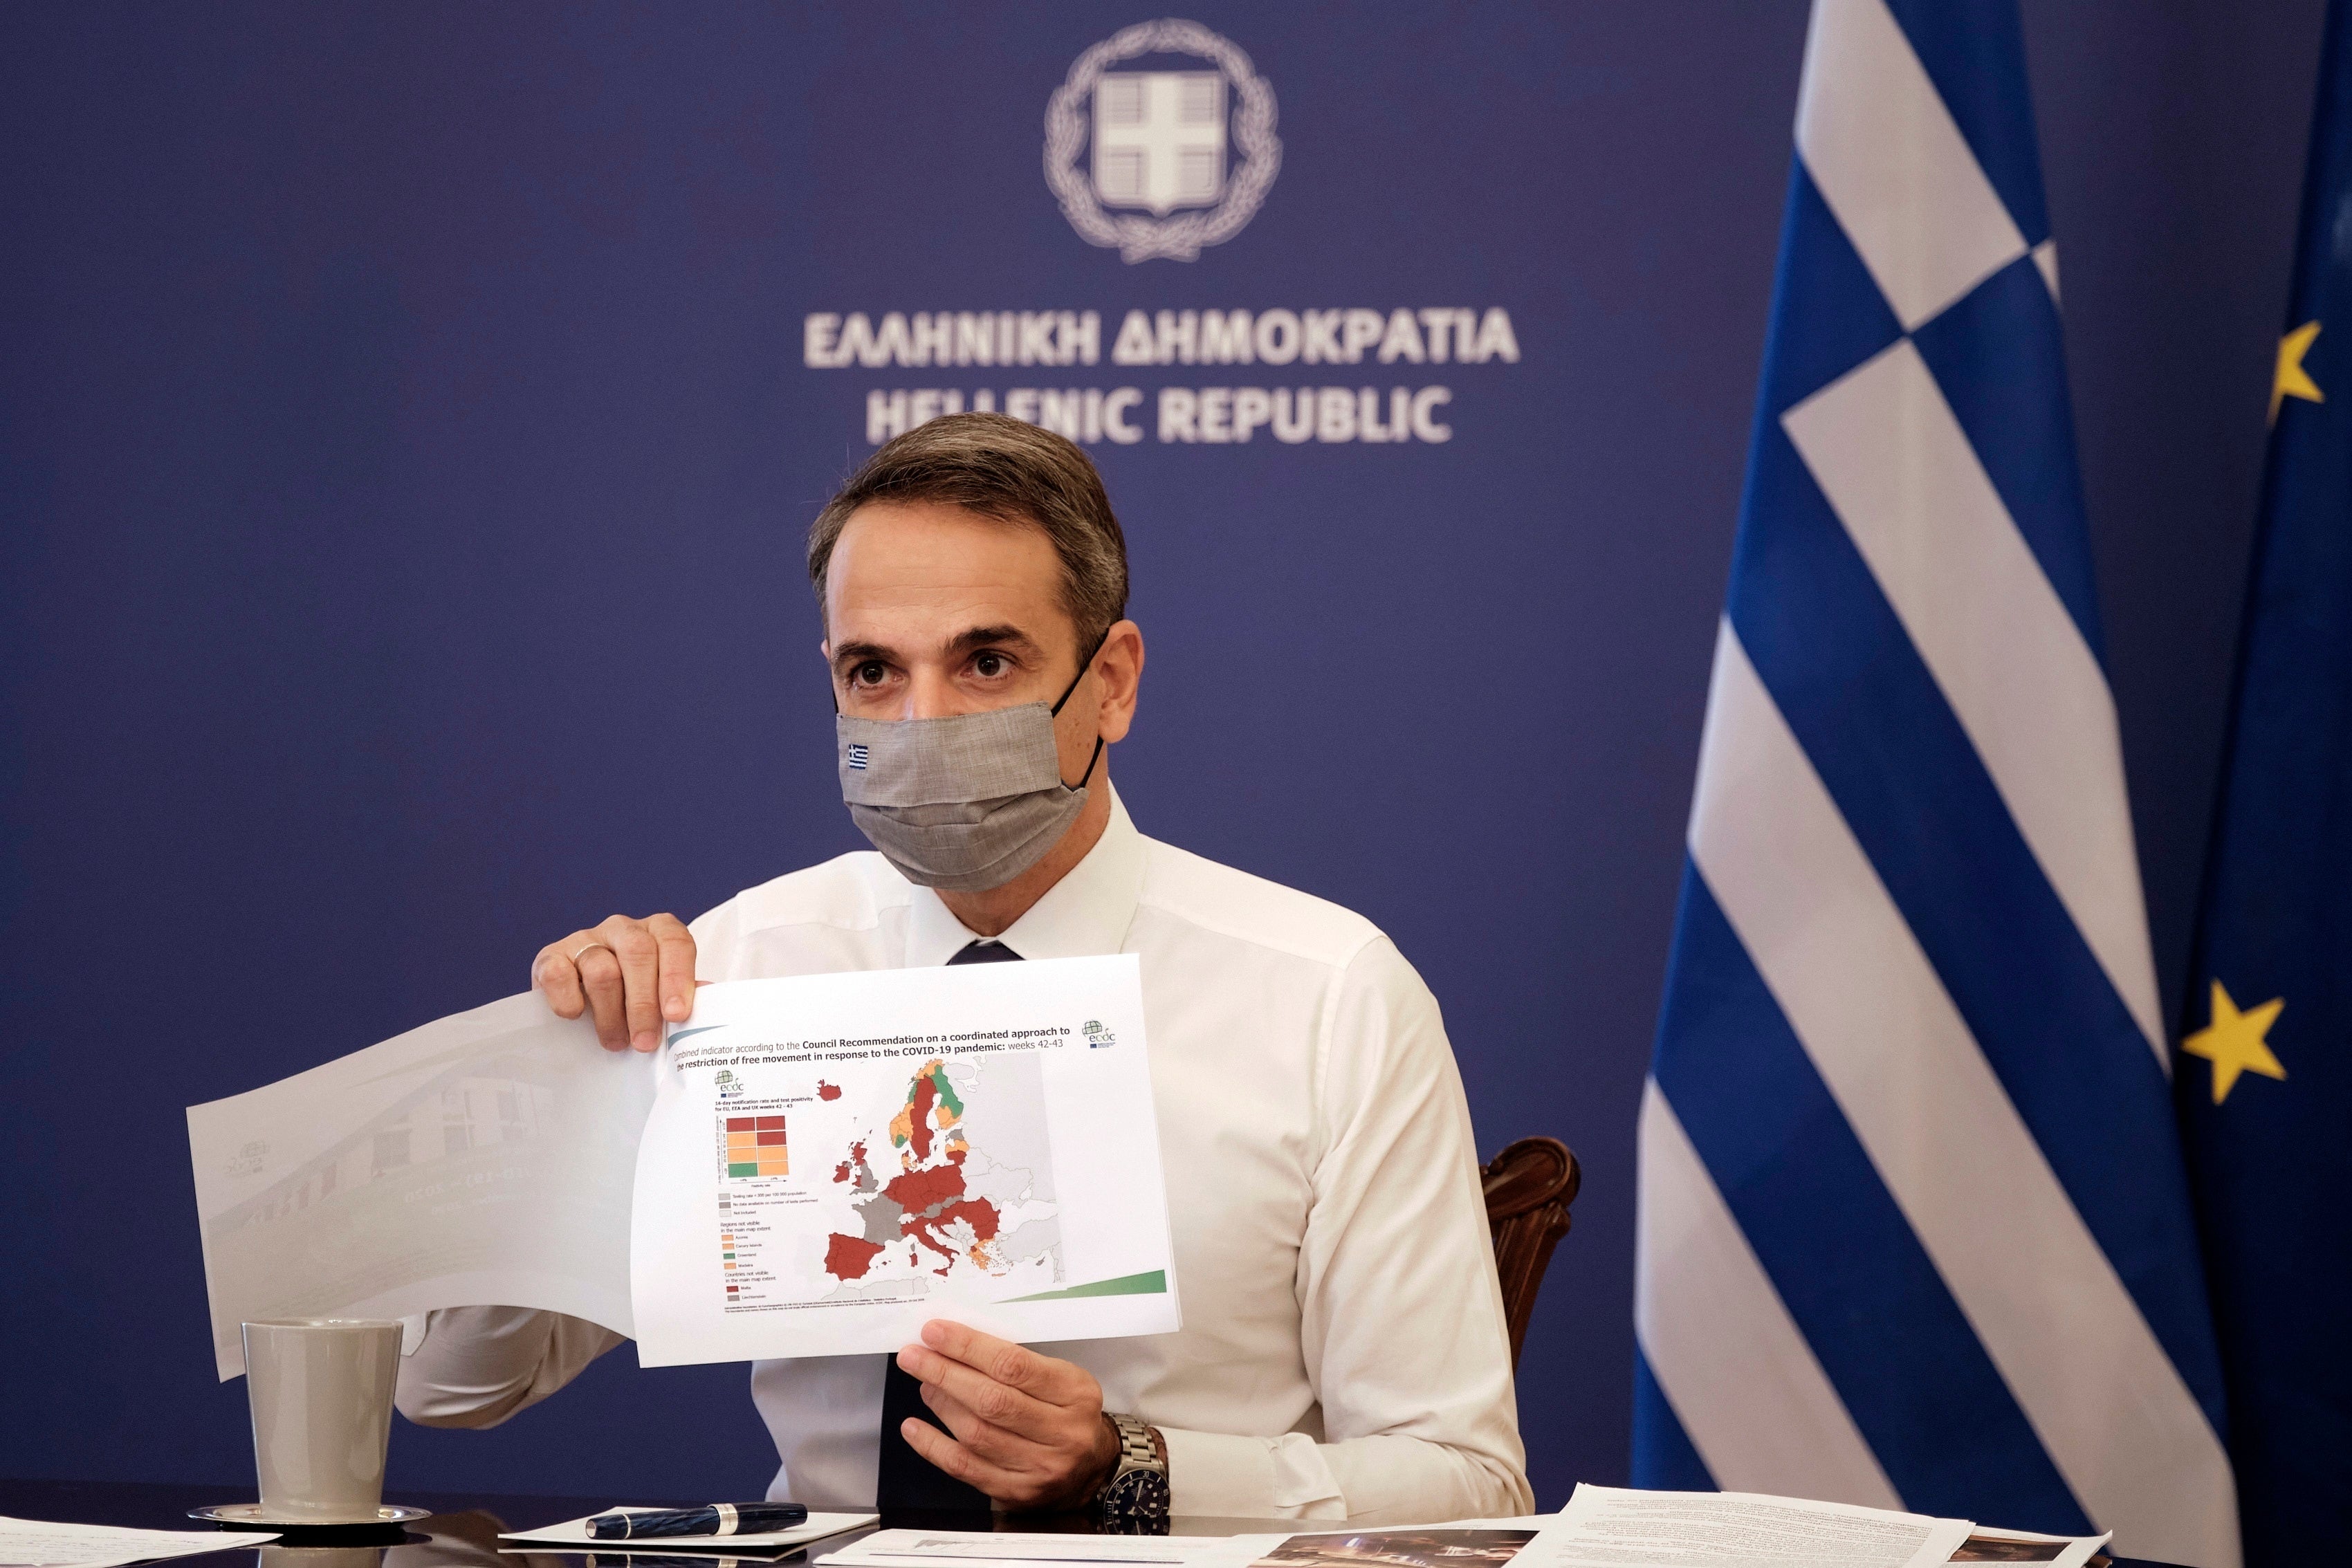 Greece’s prime minister Kyriakos Mitsotakis shows a map of Europe during his announcement on the country’s new lockdown